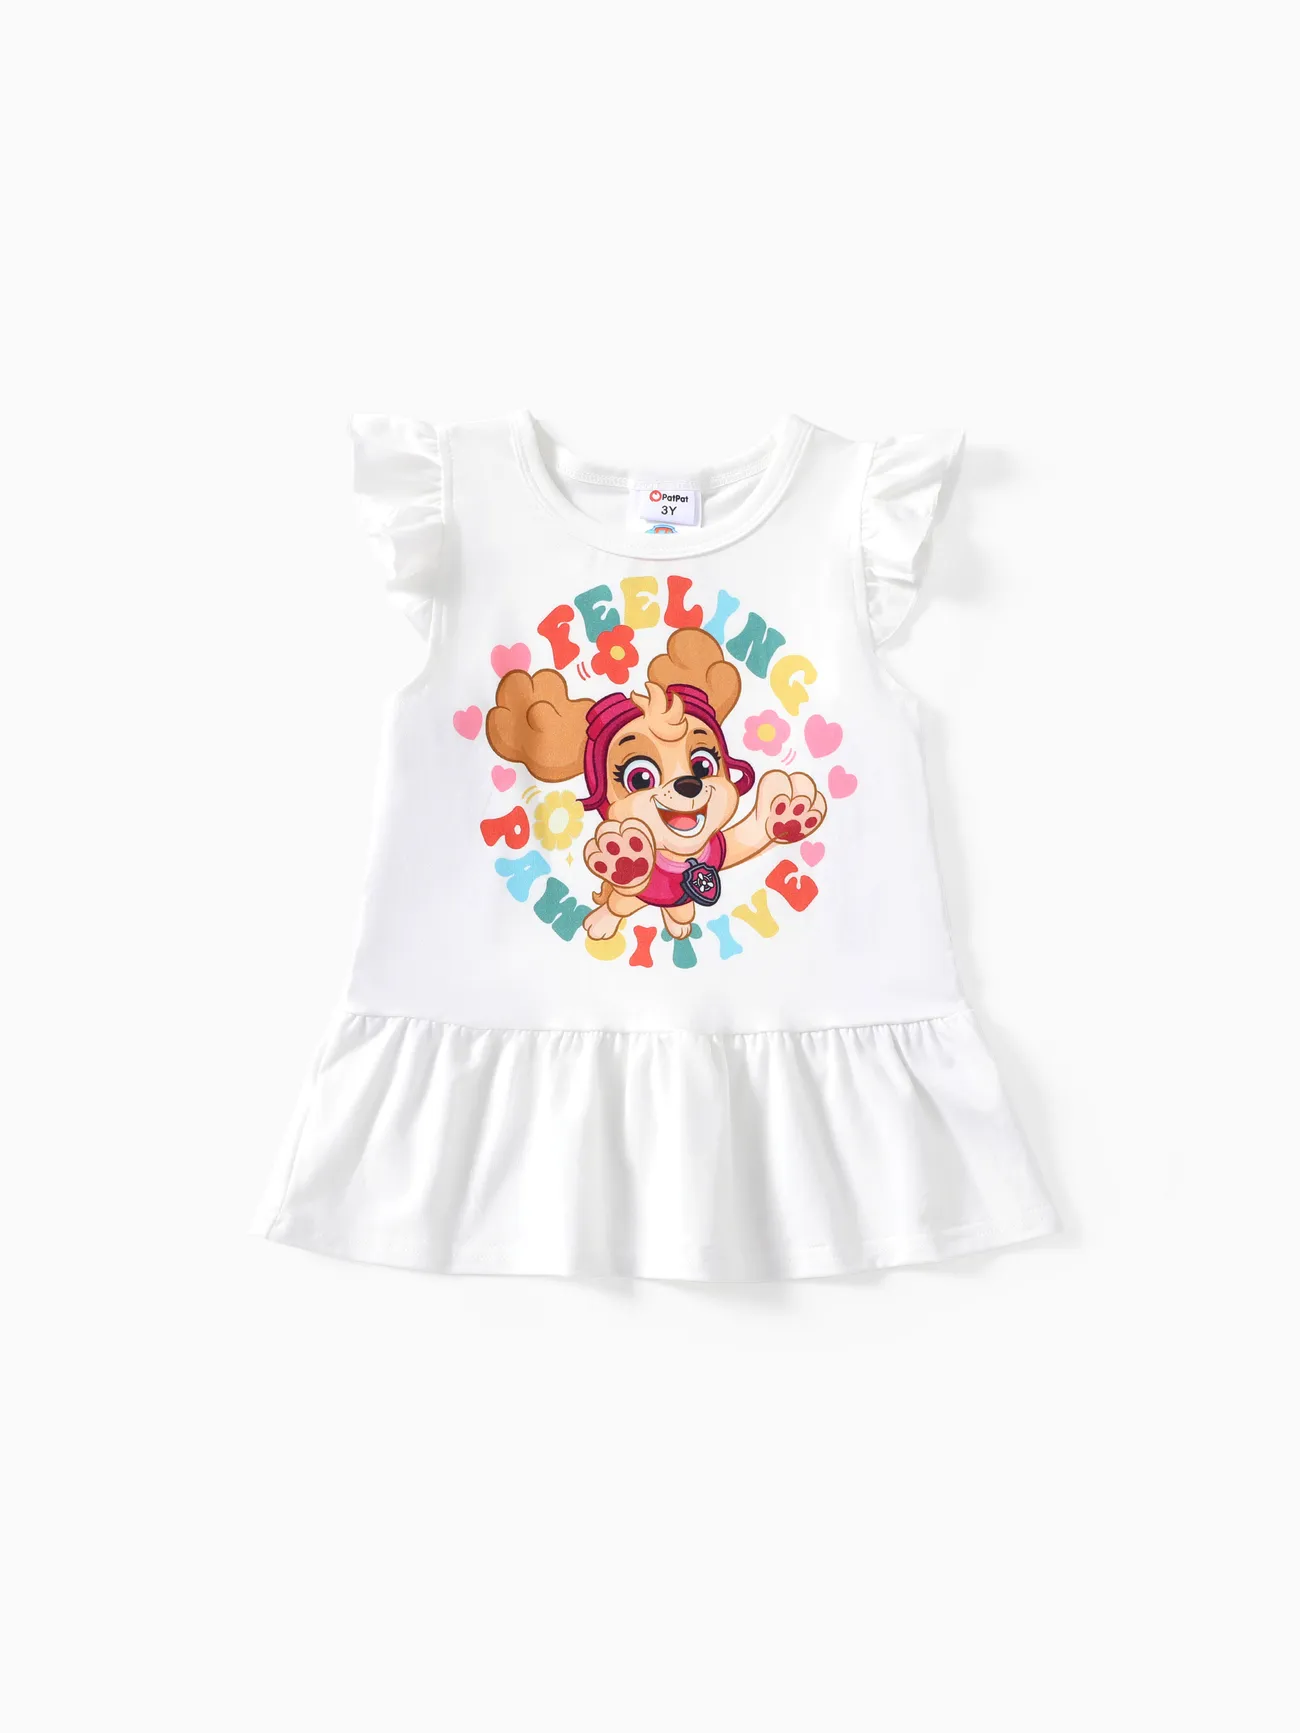 Paw Patrol Toddler Girls 2pcs Cute Character Floral Print Flutter-sleeve Top with Flower Rainbow Print Leggings Set White big image 1